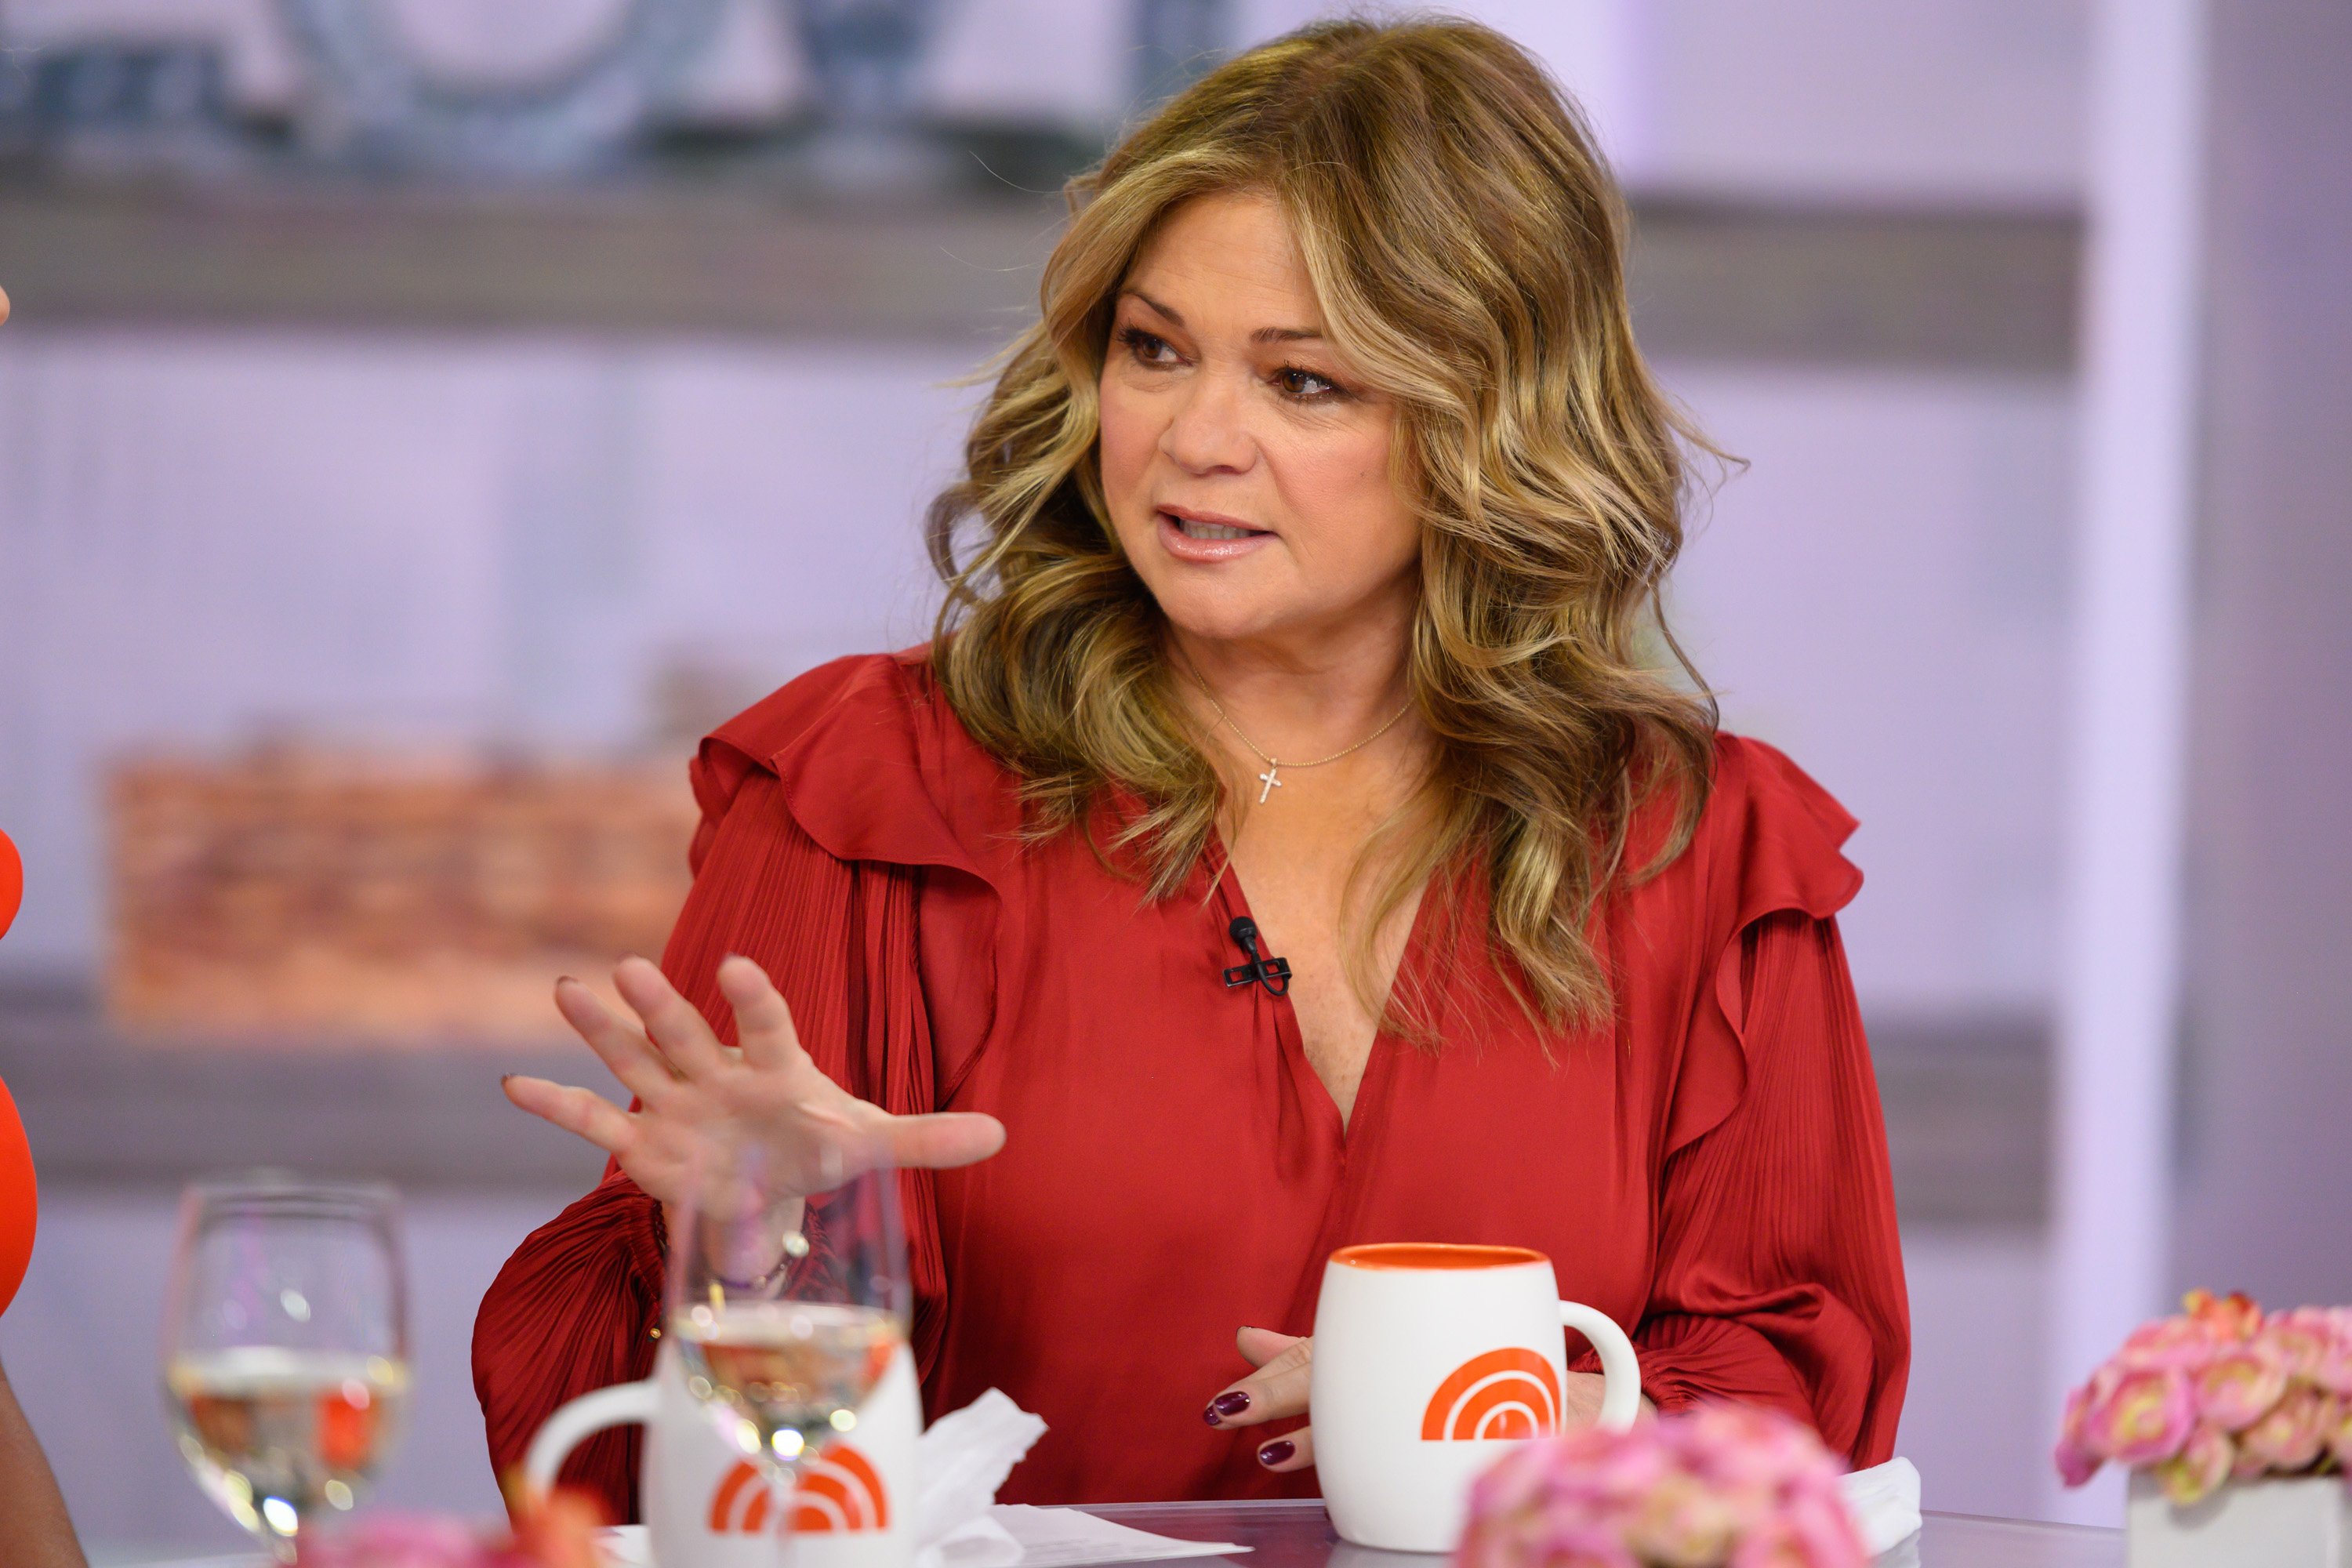 Actor Valerie Bertinelli has a positive presence on Twitter but has been known to serve up the sass to those posting less-than-kind tweets about her.